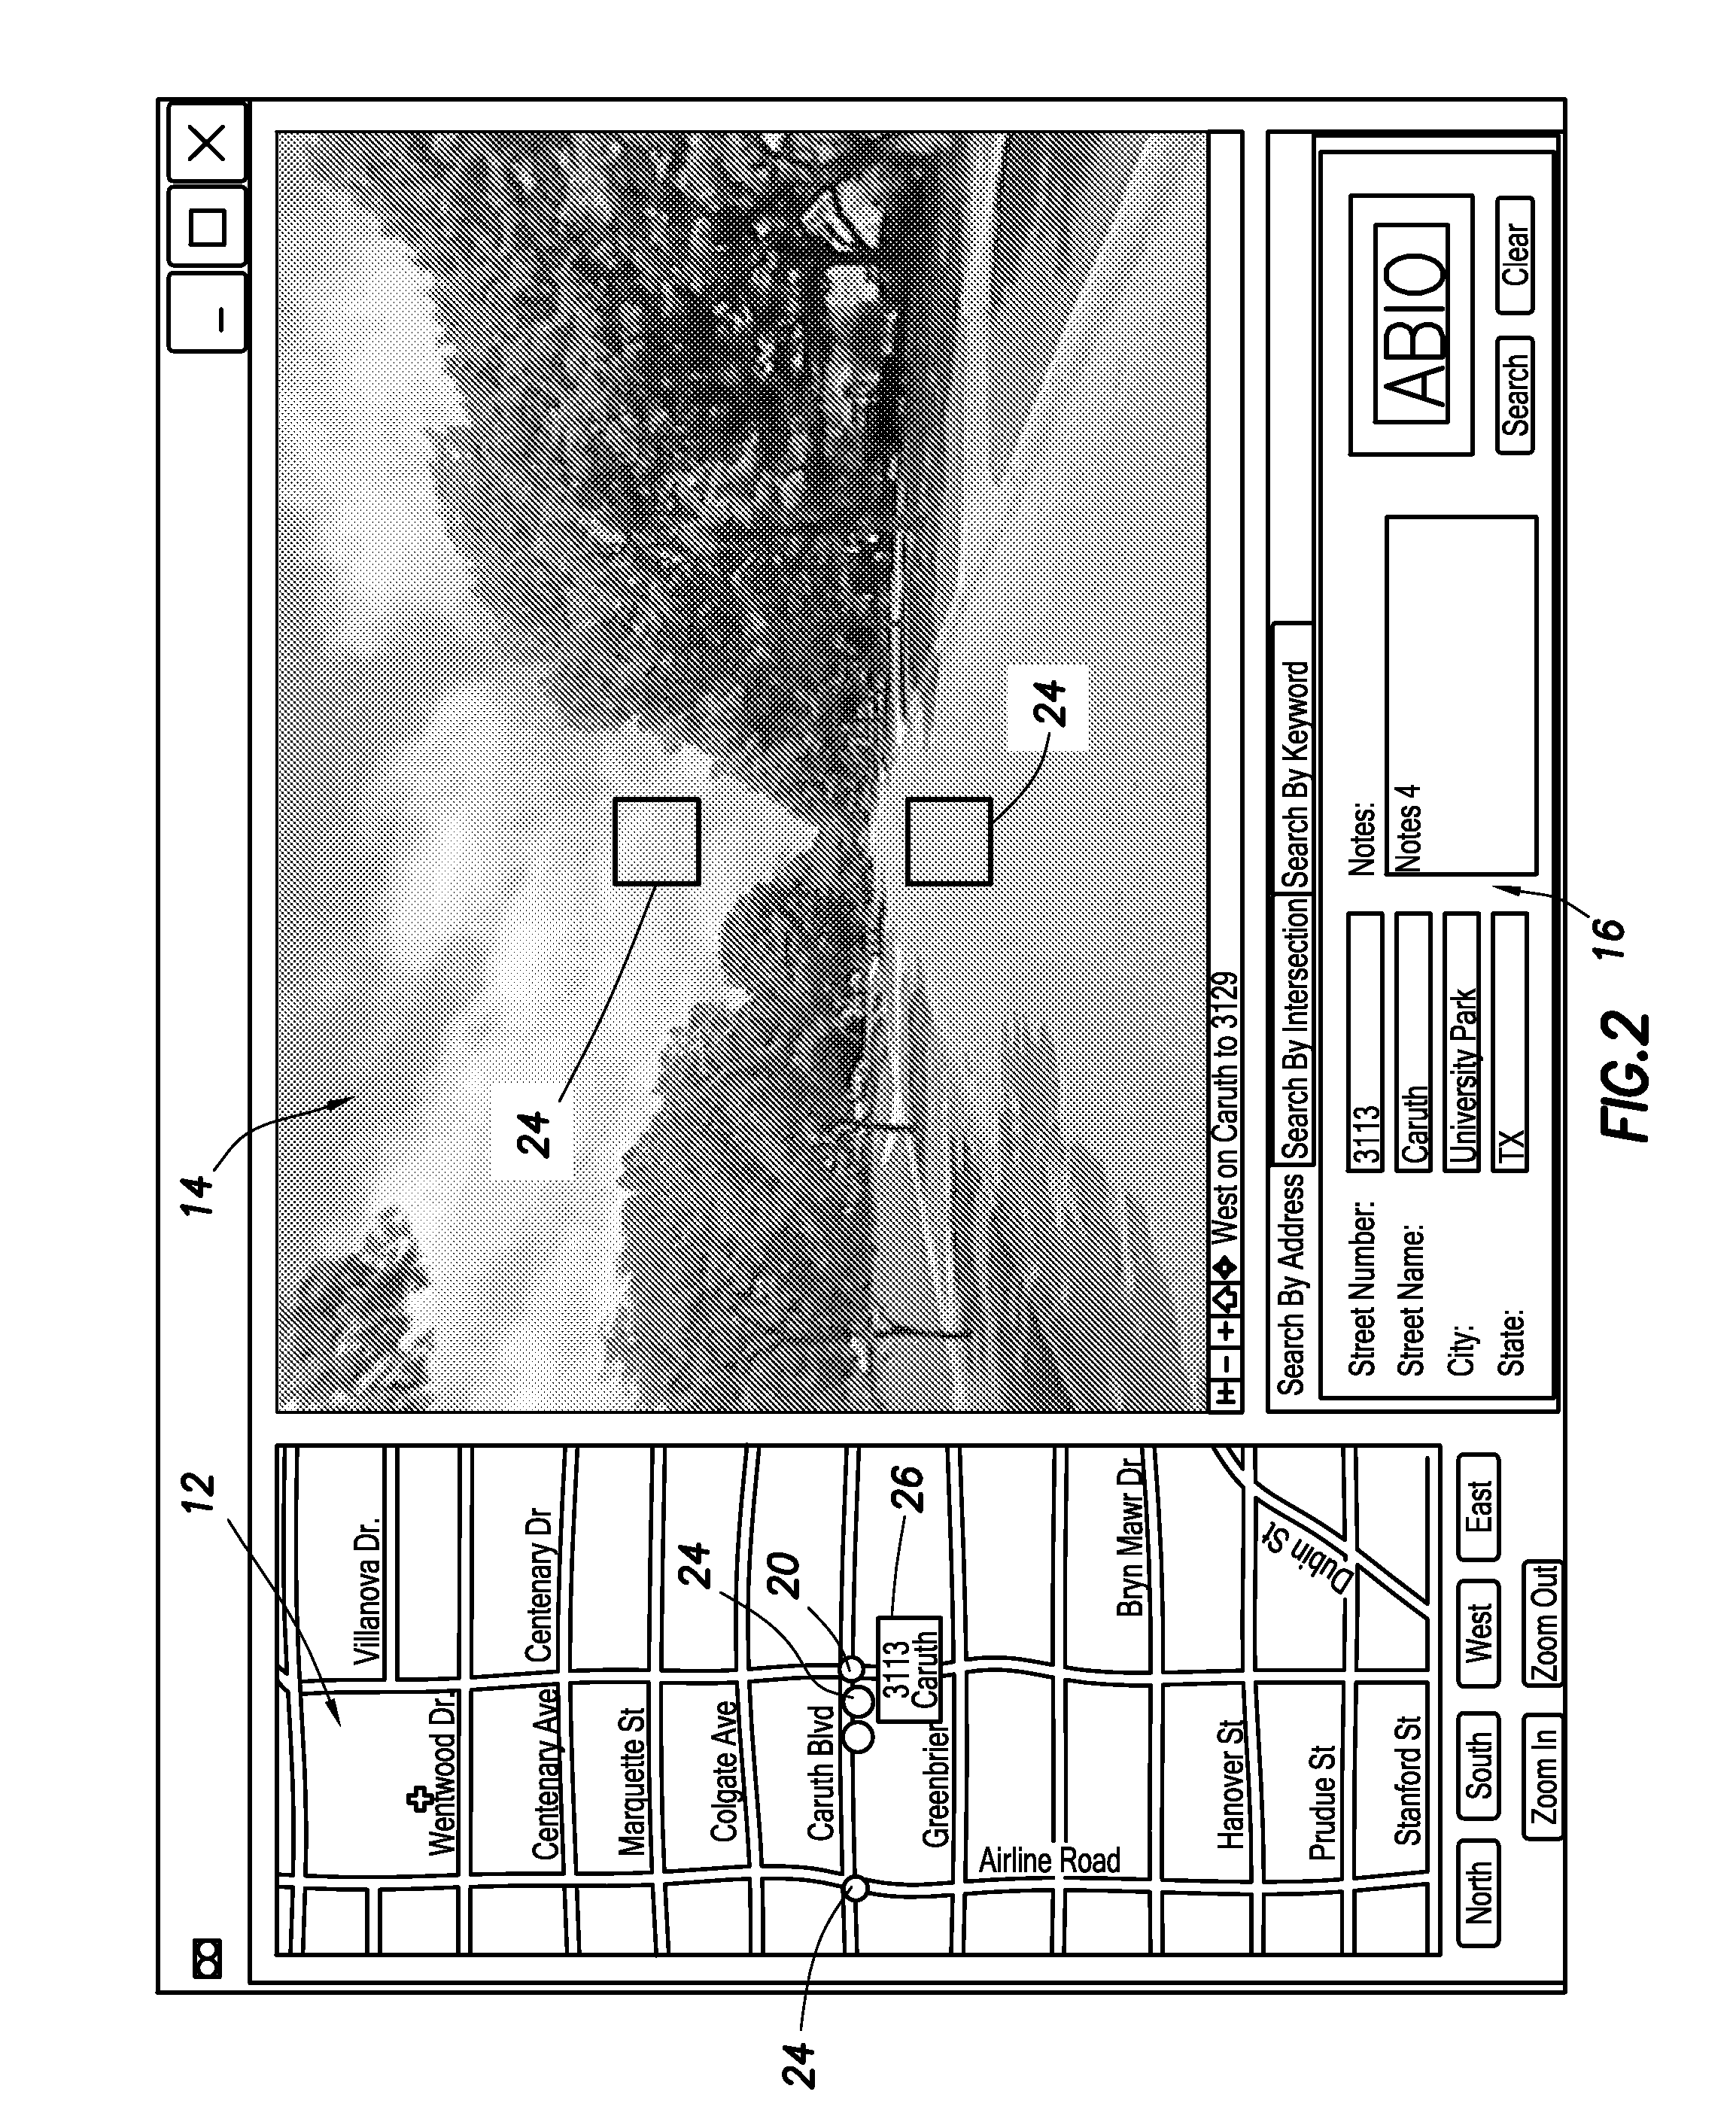 Method and apparatus for accessing multi-dimensional mapping and information